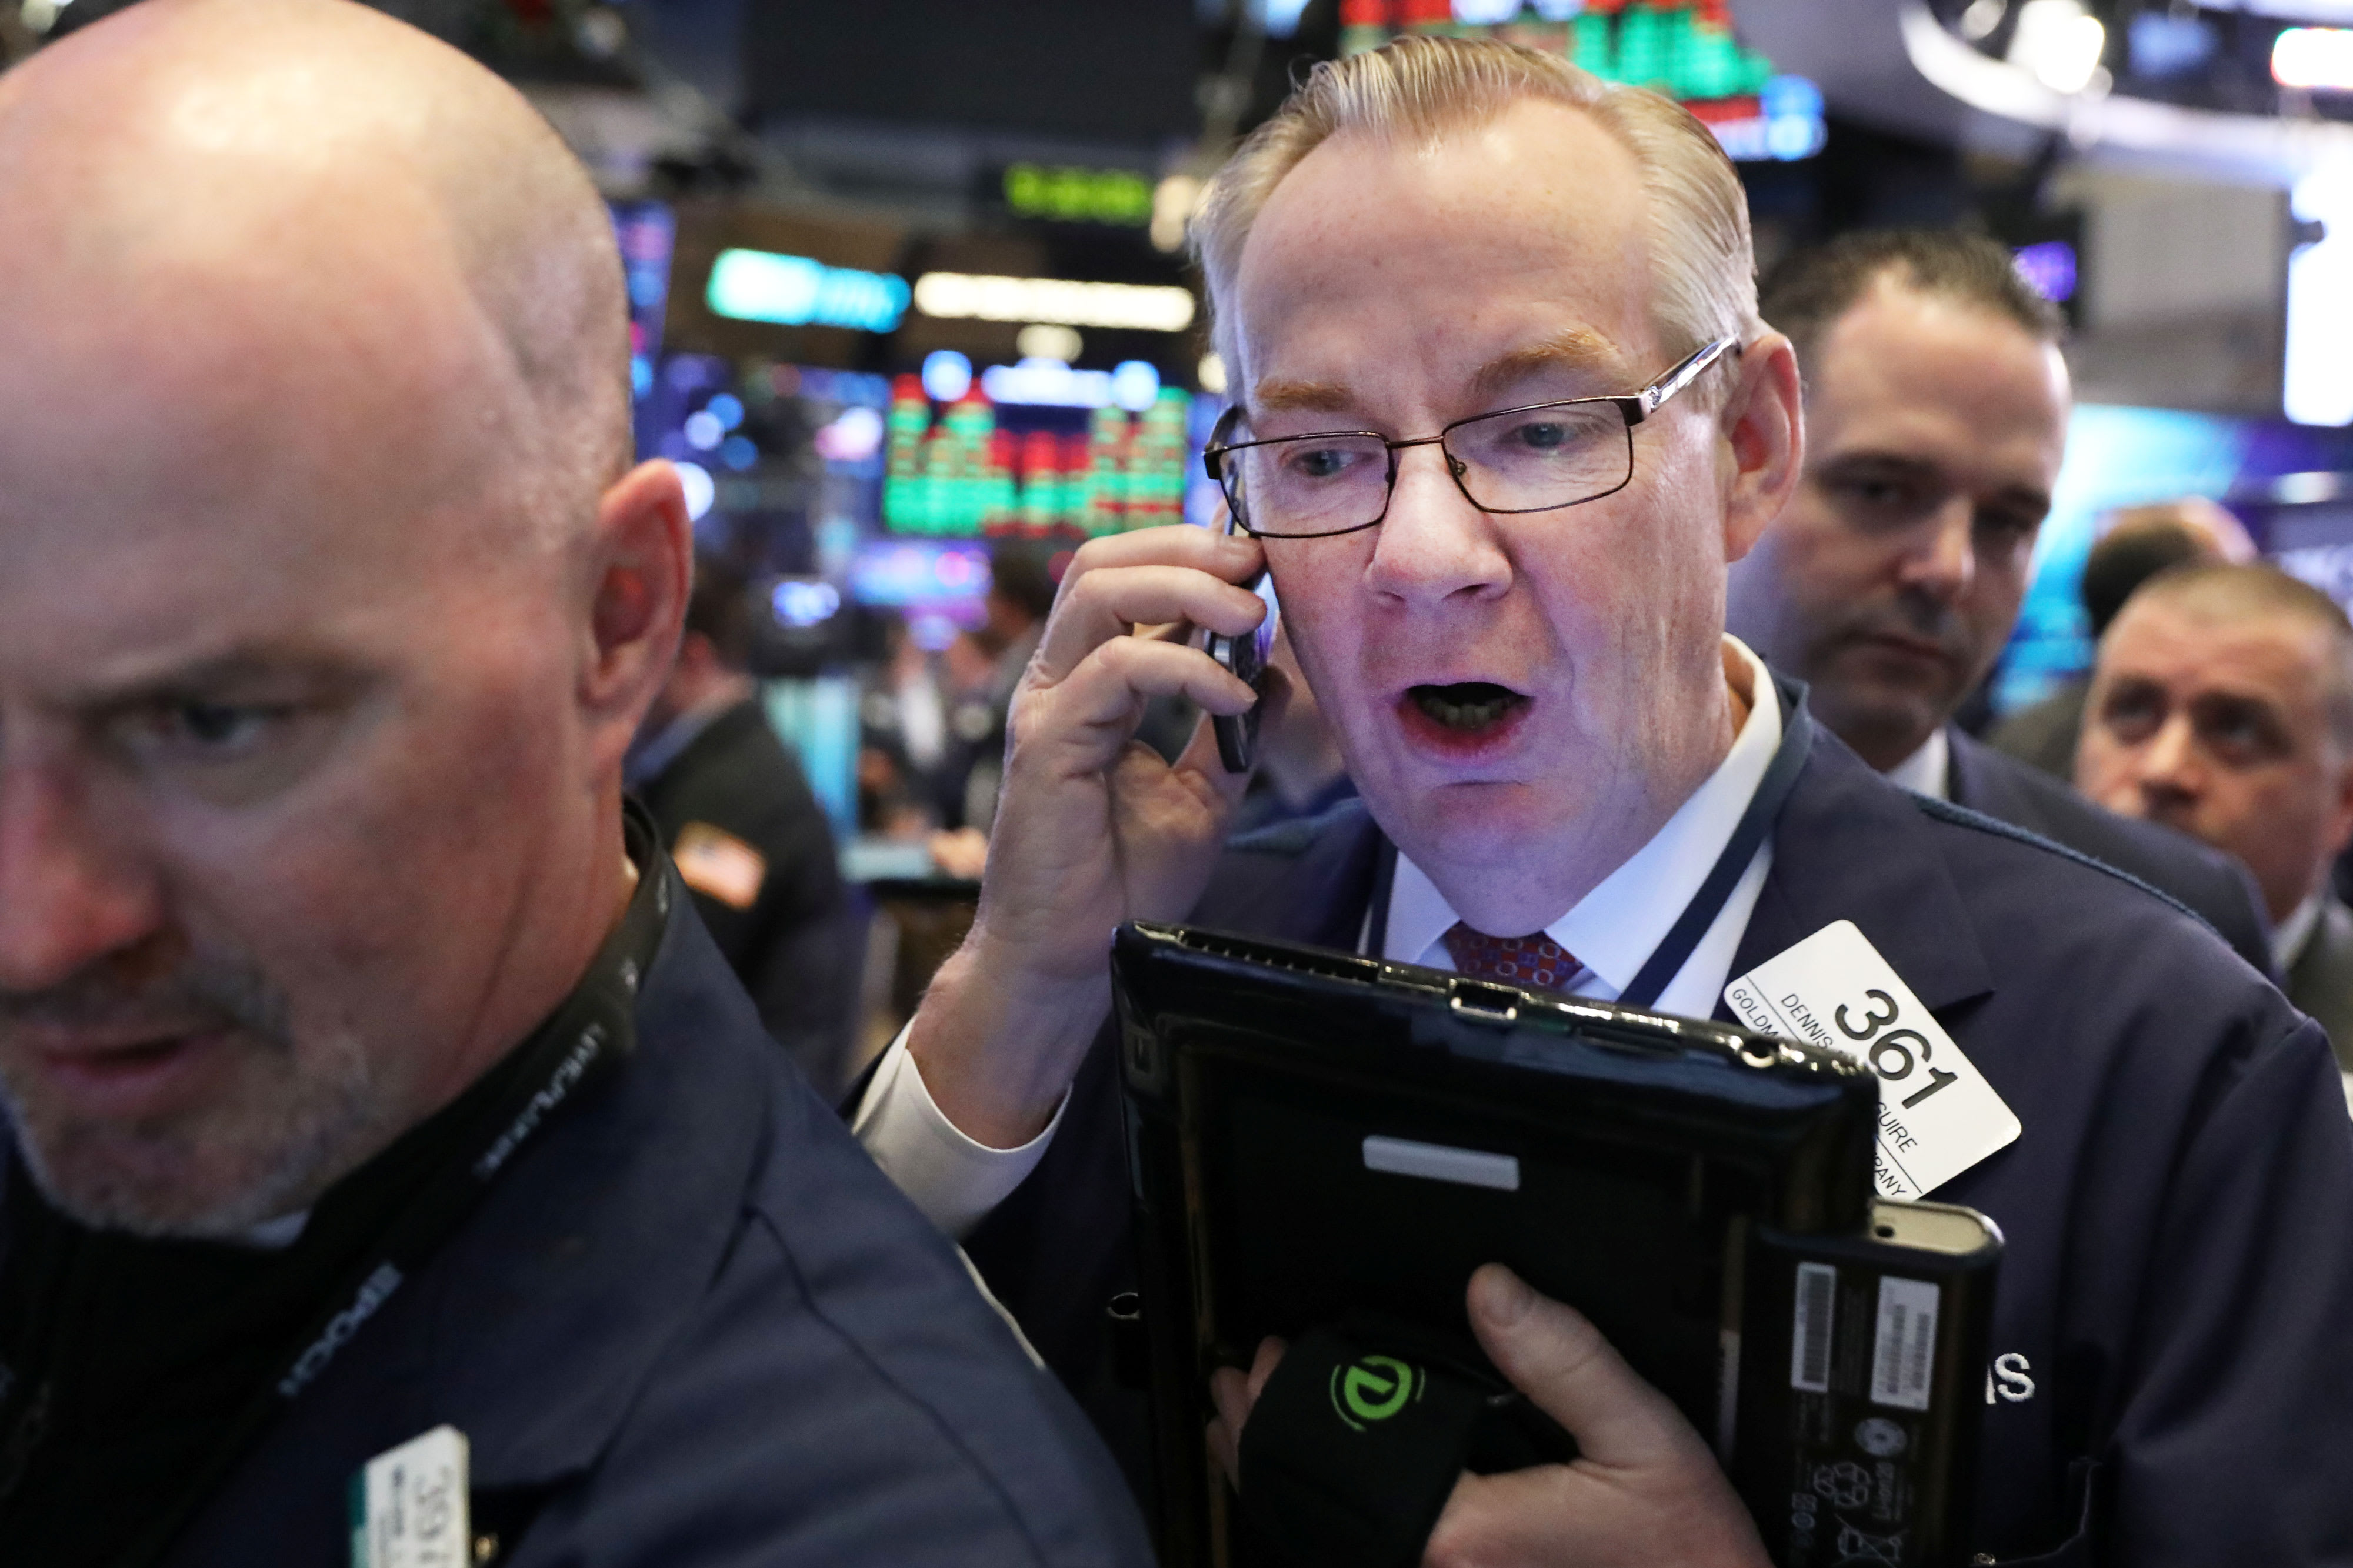 Stocks making the biggest moves midday: Lyft, Exxon Mobil, GM